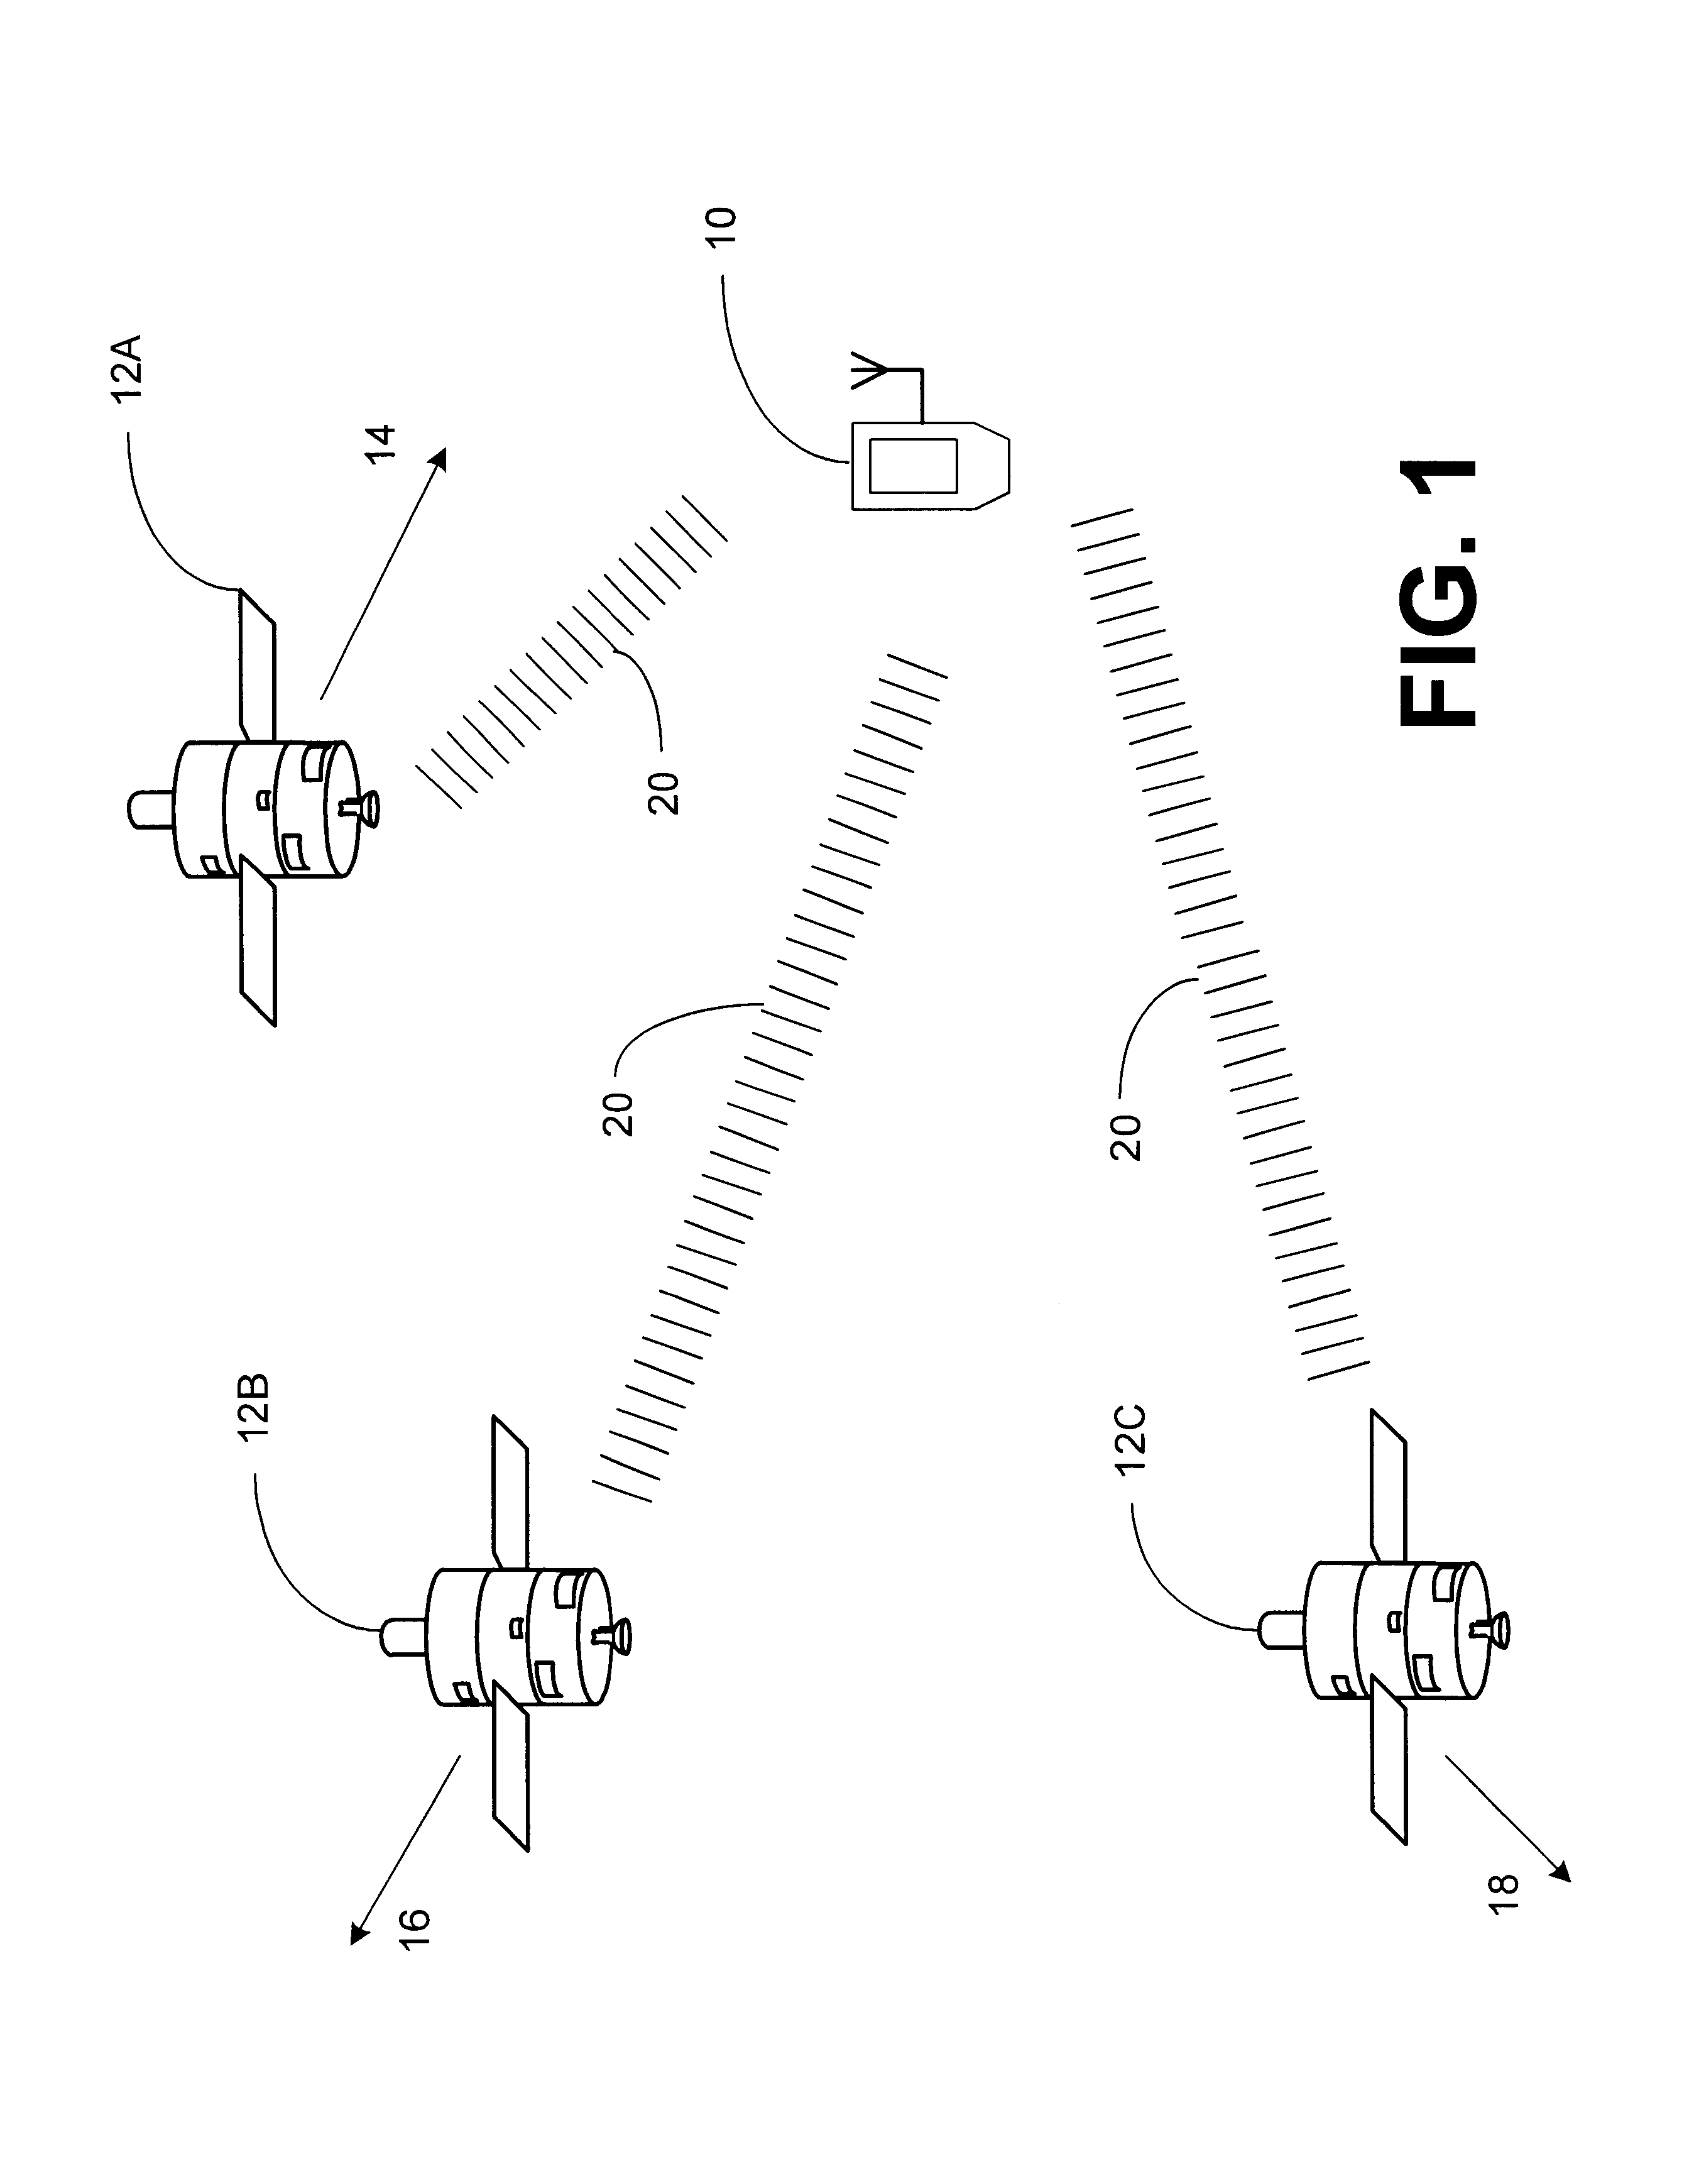 Signal detector and method employing a coherent accumulation system to correlate non-uniform and disjoint sample segments